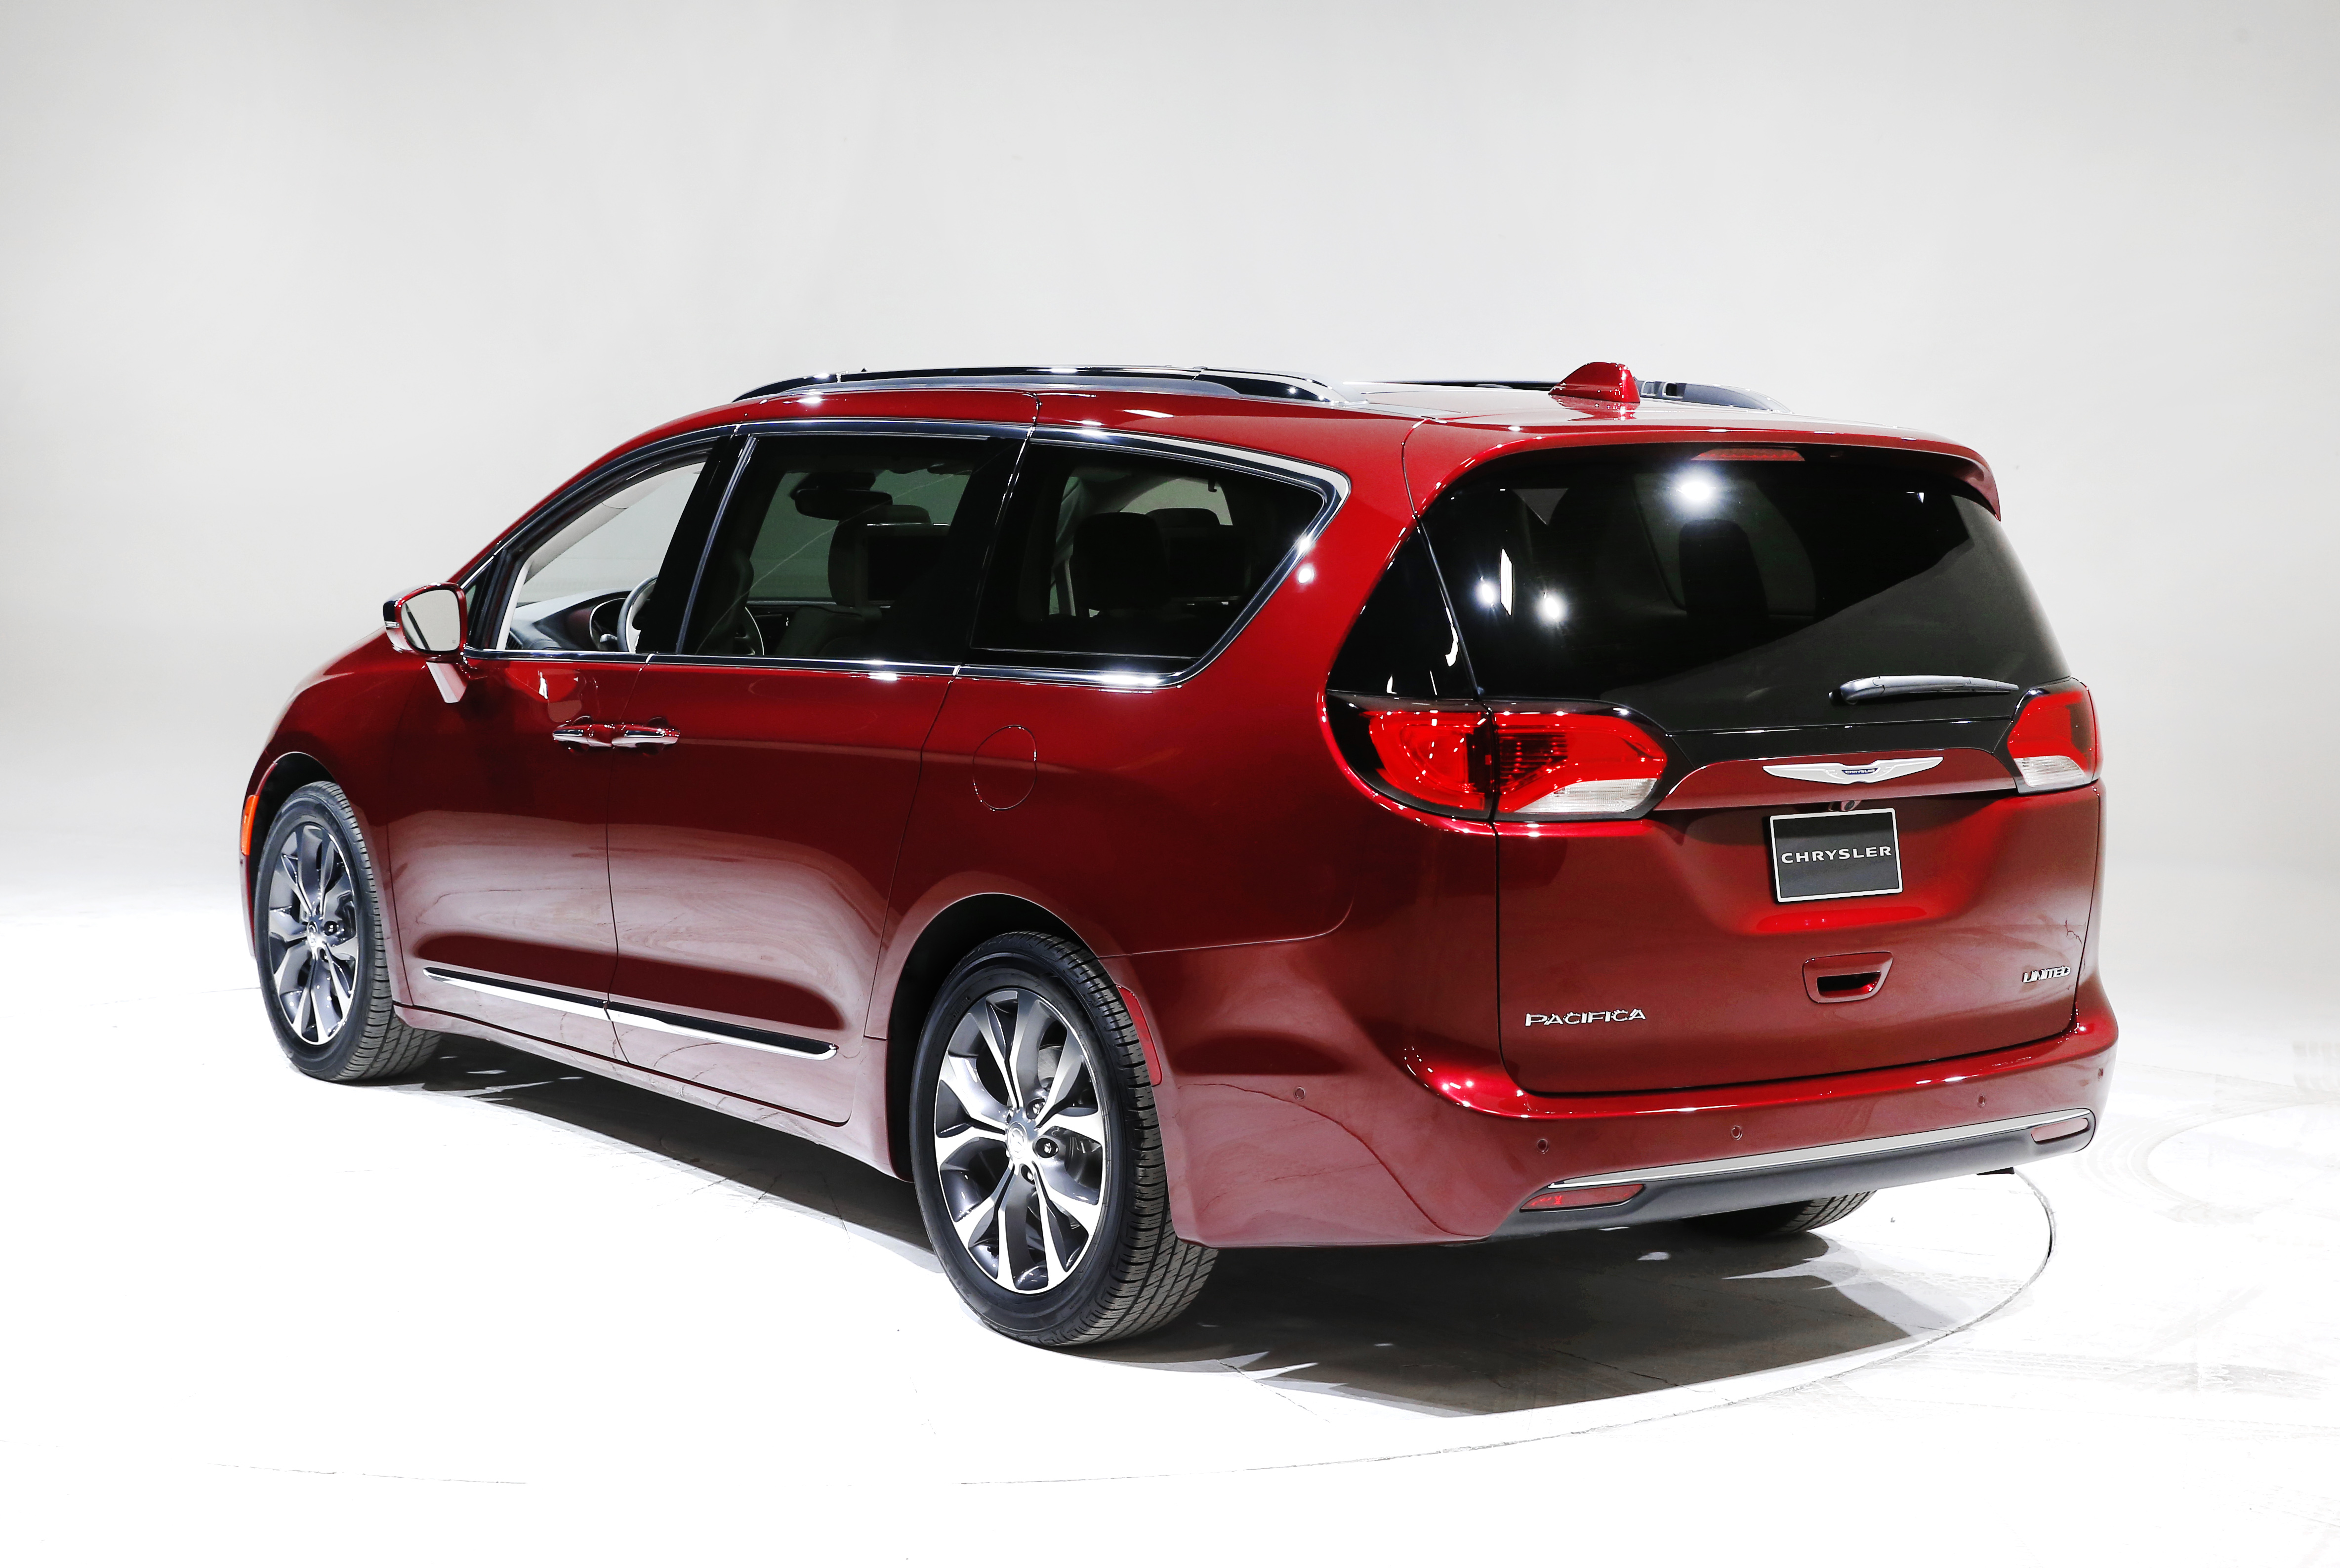 Chrysler Pacifica hd restyling